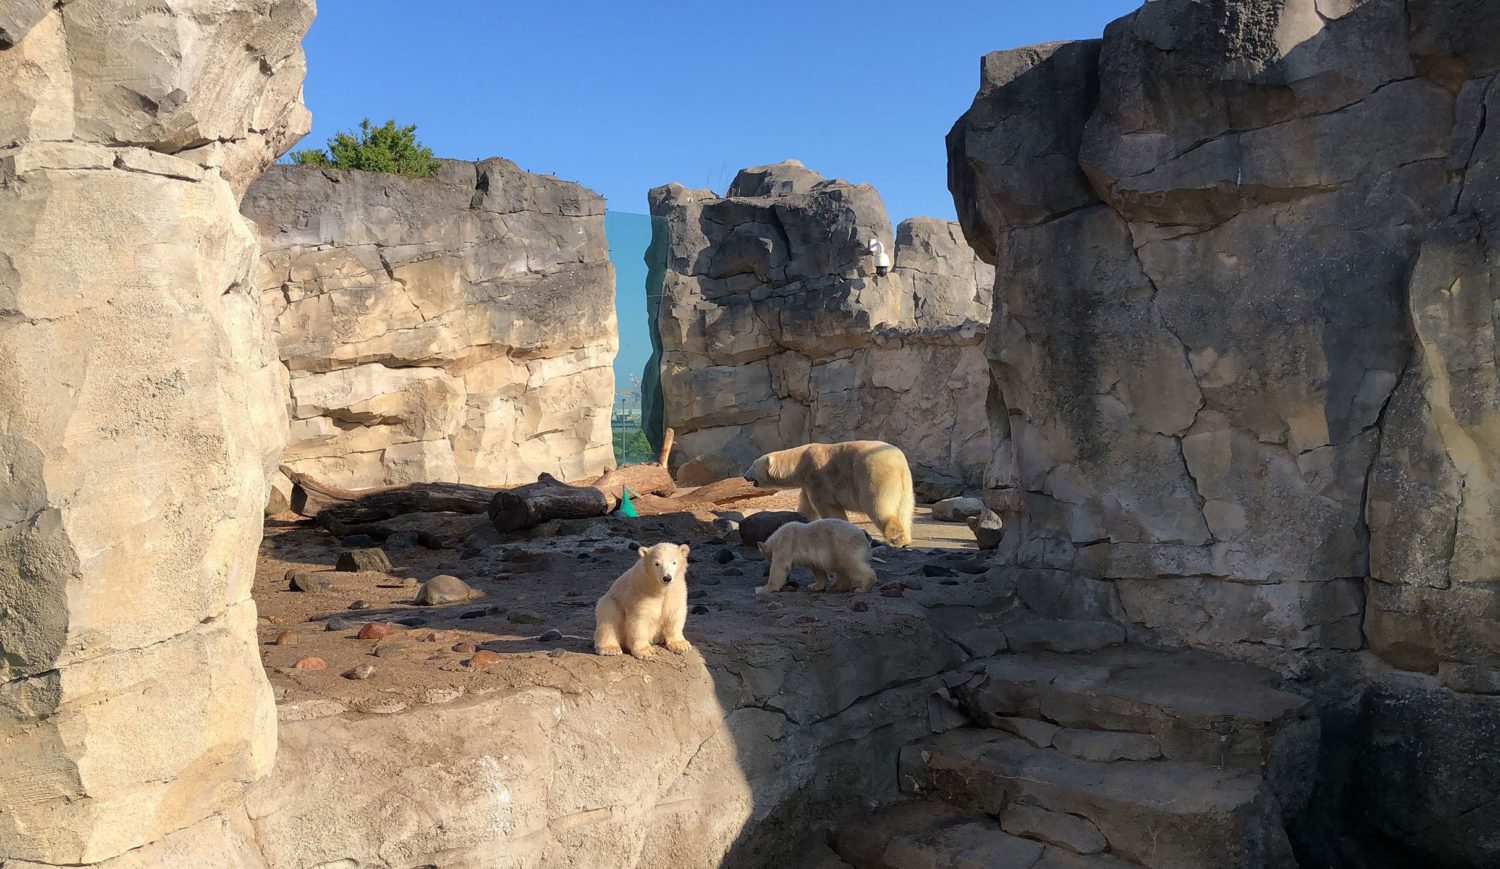 Offspring at the zoo: Polar bear twins Anna and Elsa explore the outdoor enclosure with mother Valeska © Mailin Knoke_Erlebnis Bremerhaven